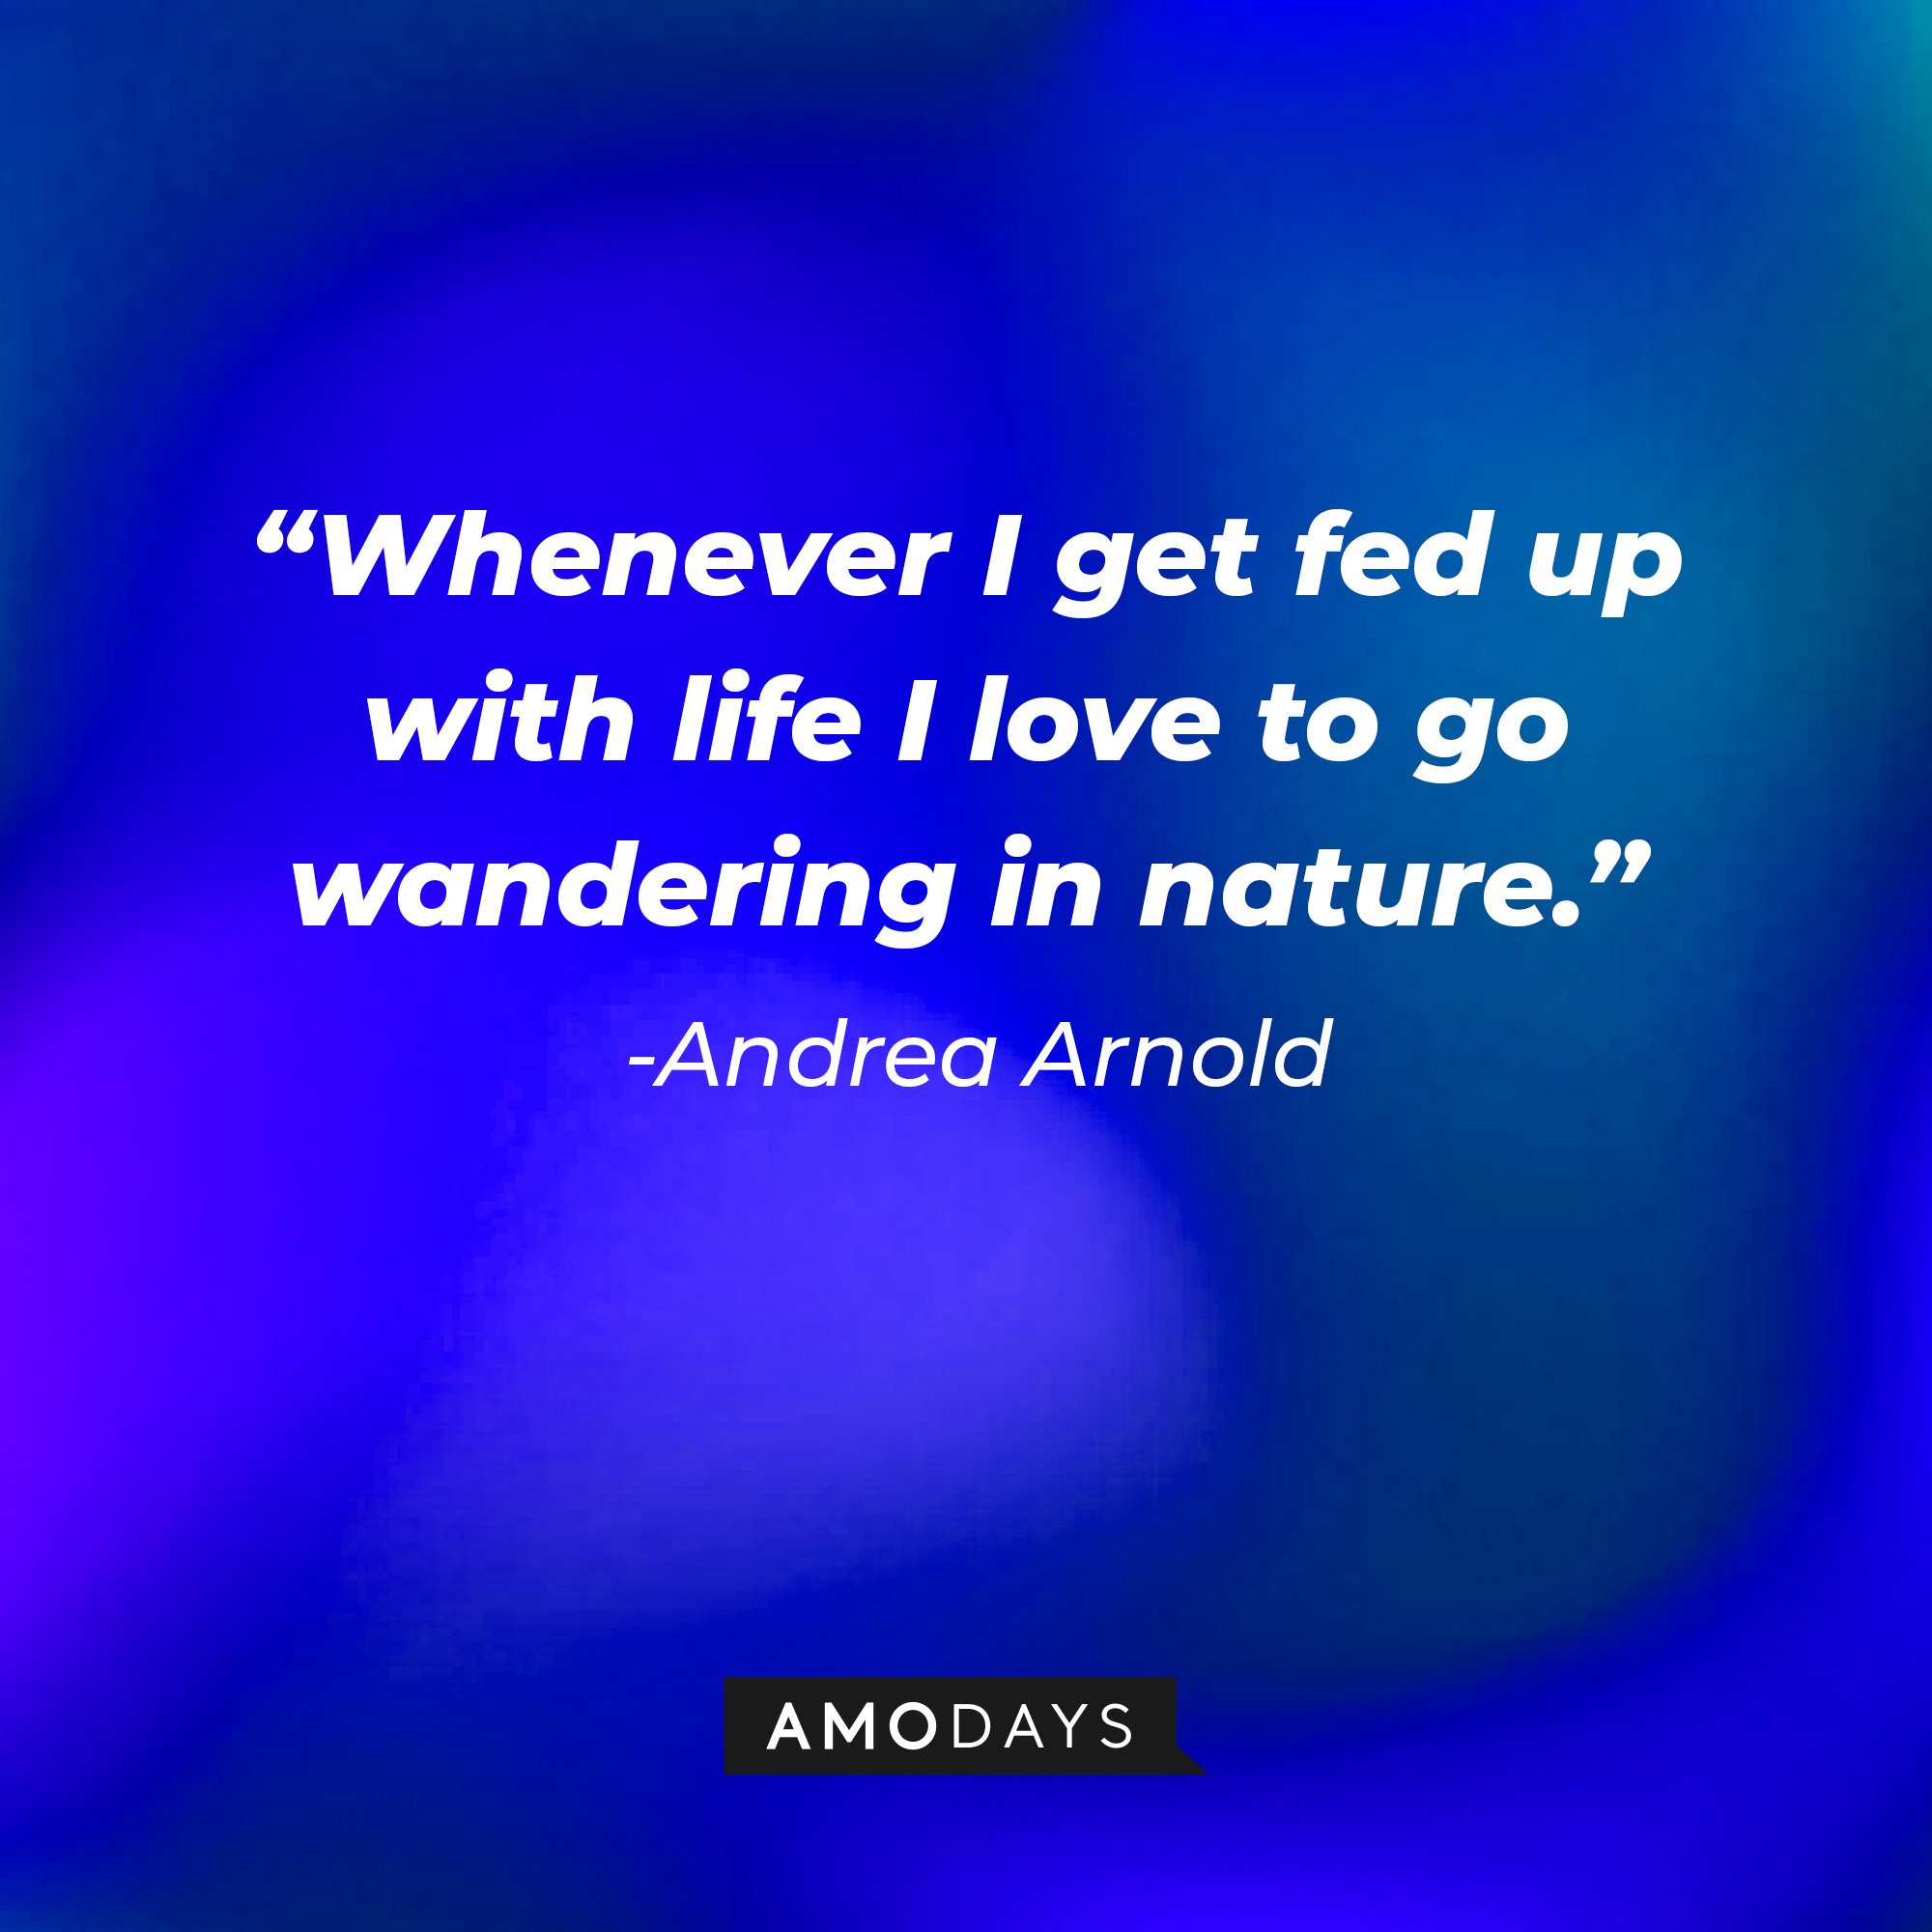 Andrea Arnold's quote: “Whenever I get fed up with life I love to go wandering in nature.” I Image: AmoDays